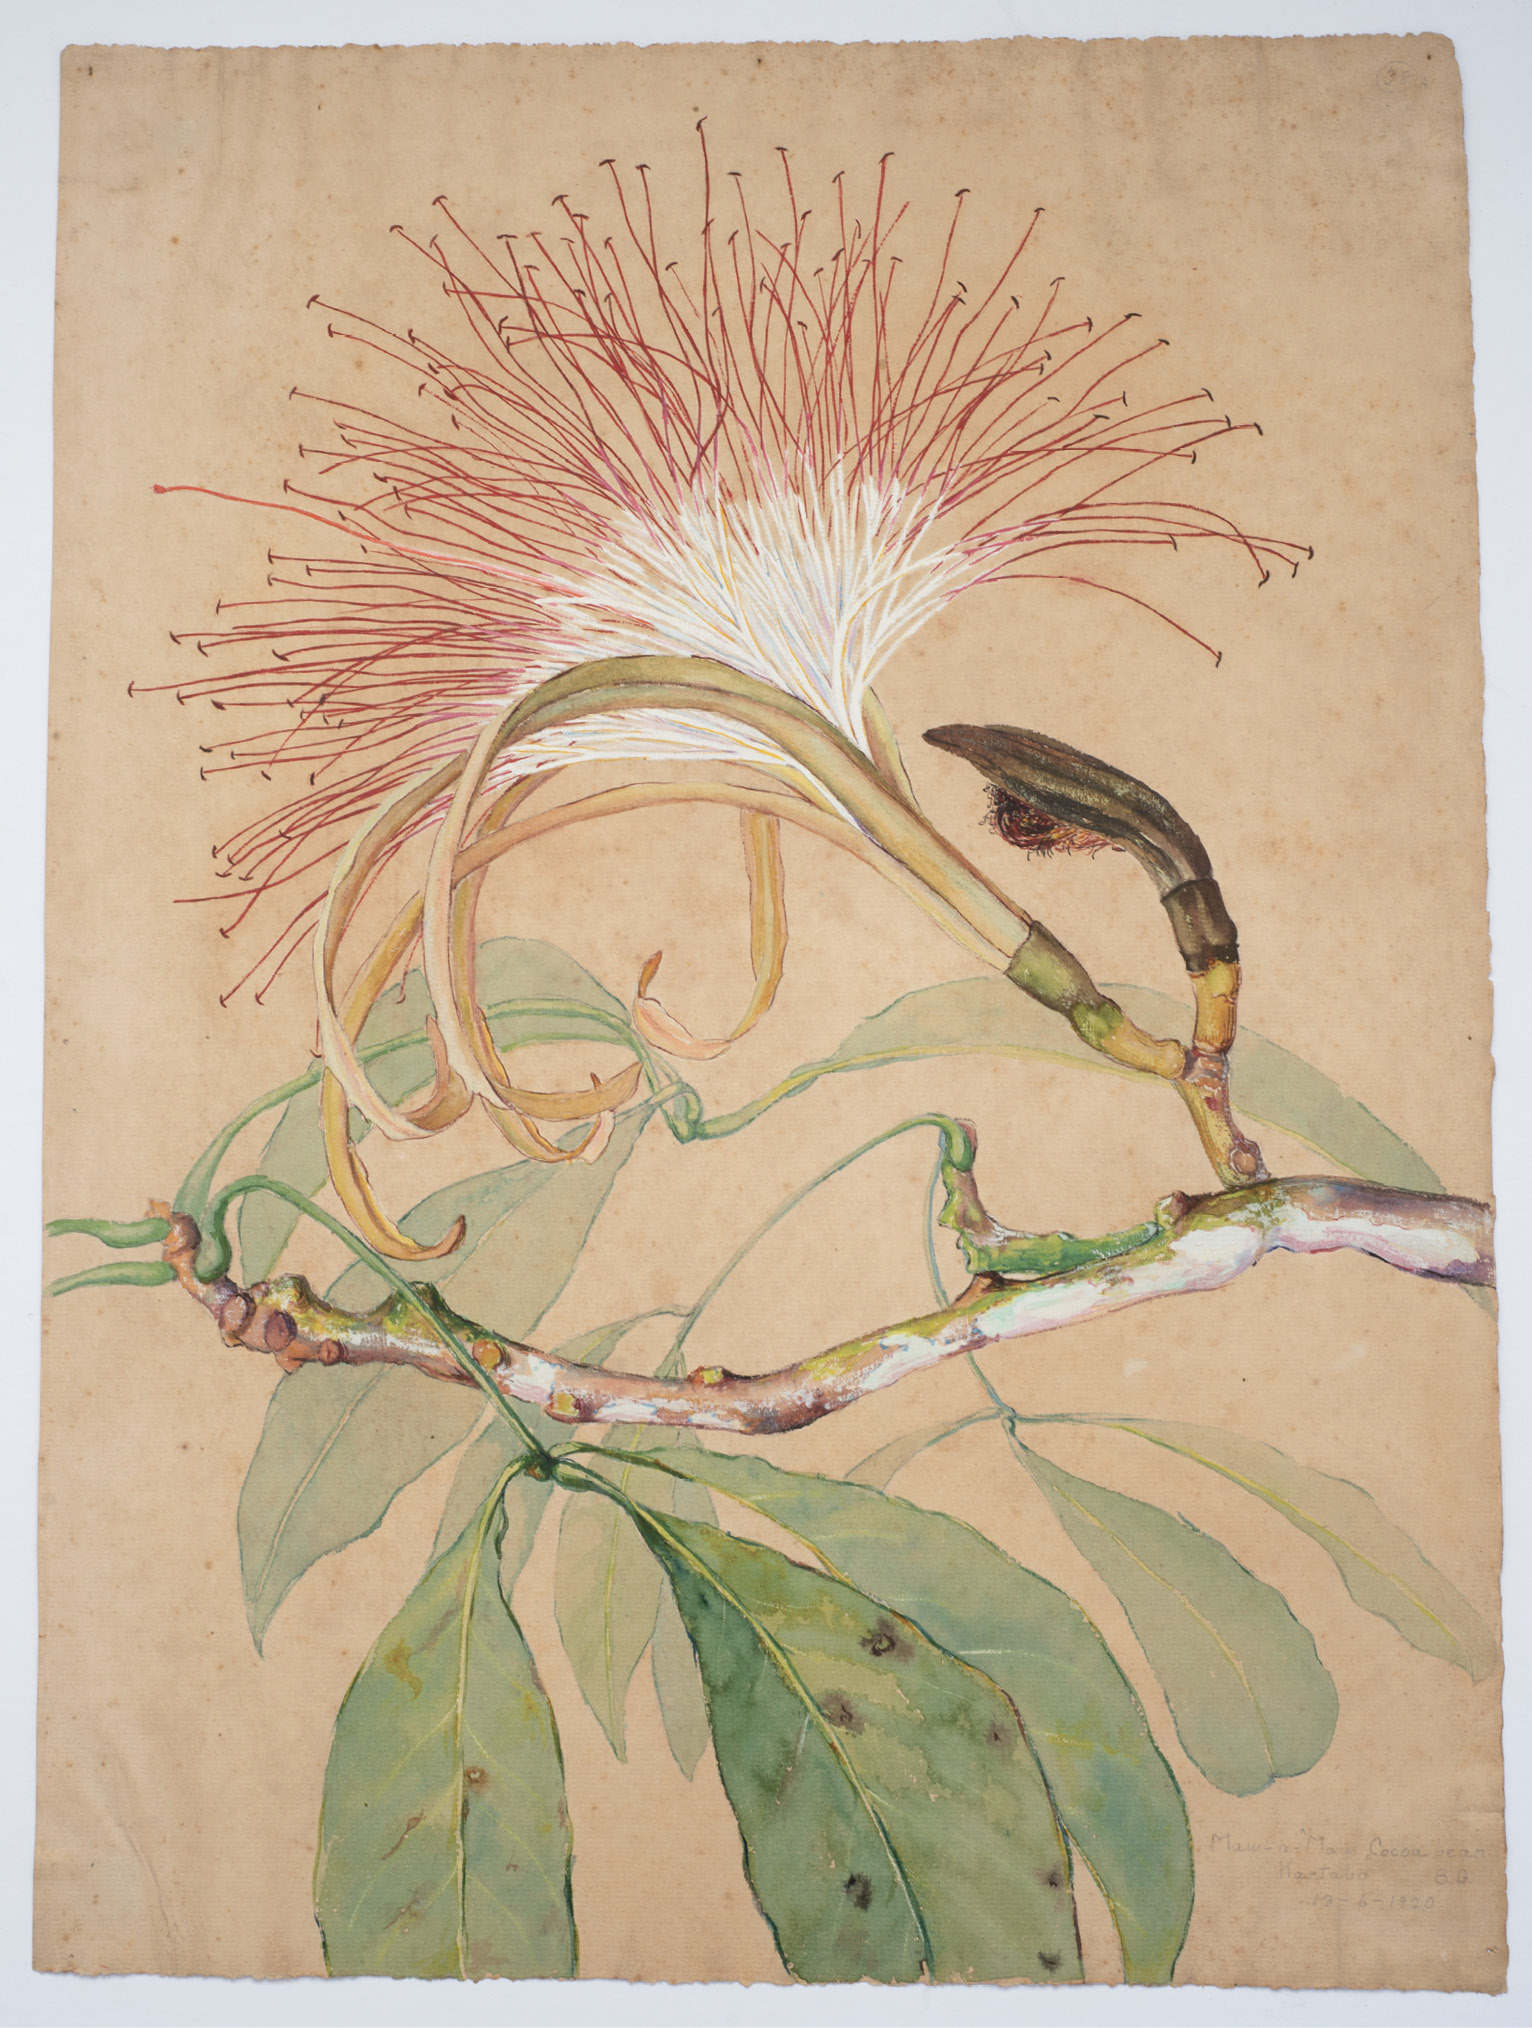 Taylor painted this detailed illustration of the cocoa bean tree’s branch, leaves, buds, and flowers from the jungles of Kartabo, British Guiana, in watercolor and gouache (Maw-a-maw, Cocoa bean, 1920).